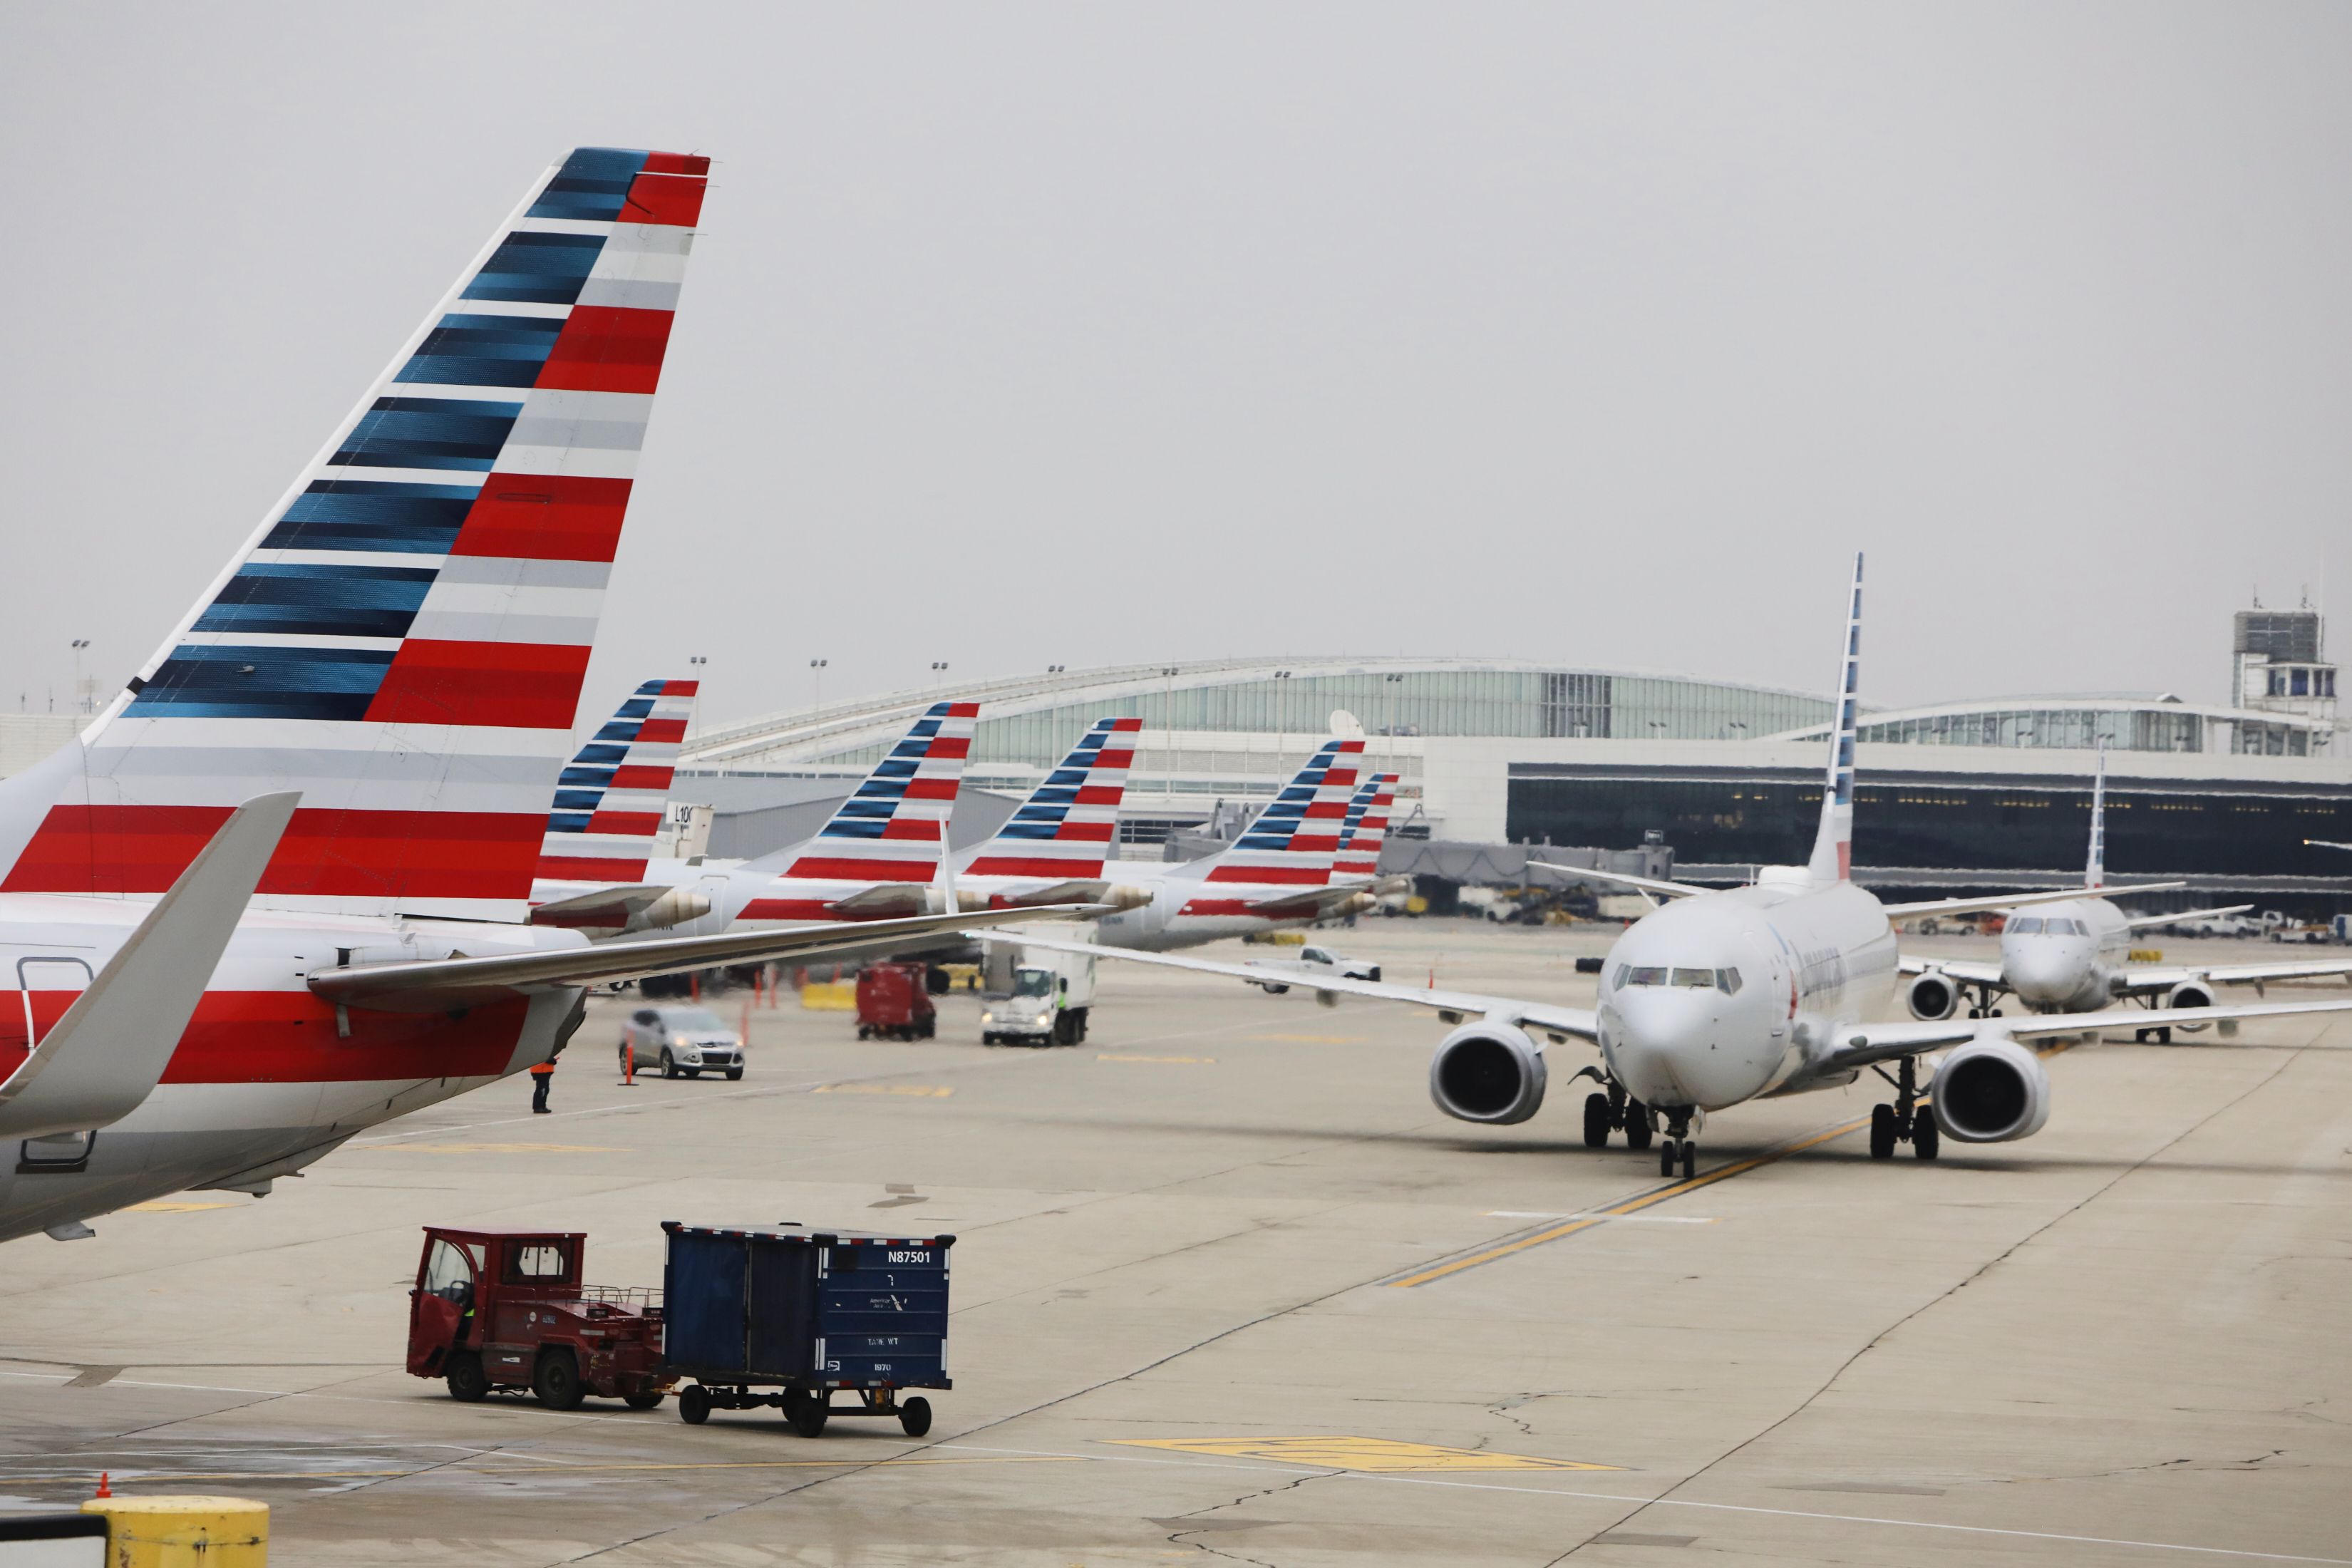 Several American Airlines aircraft on an airport apron.